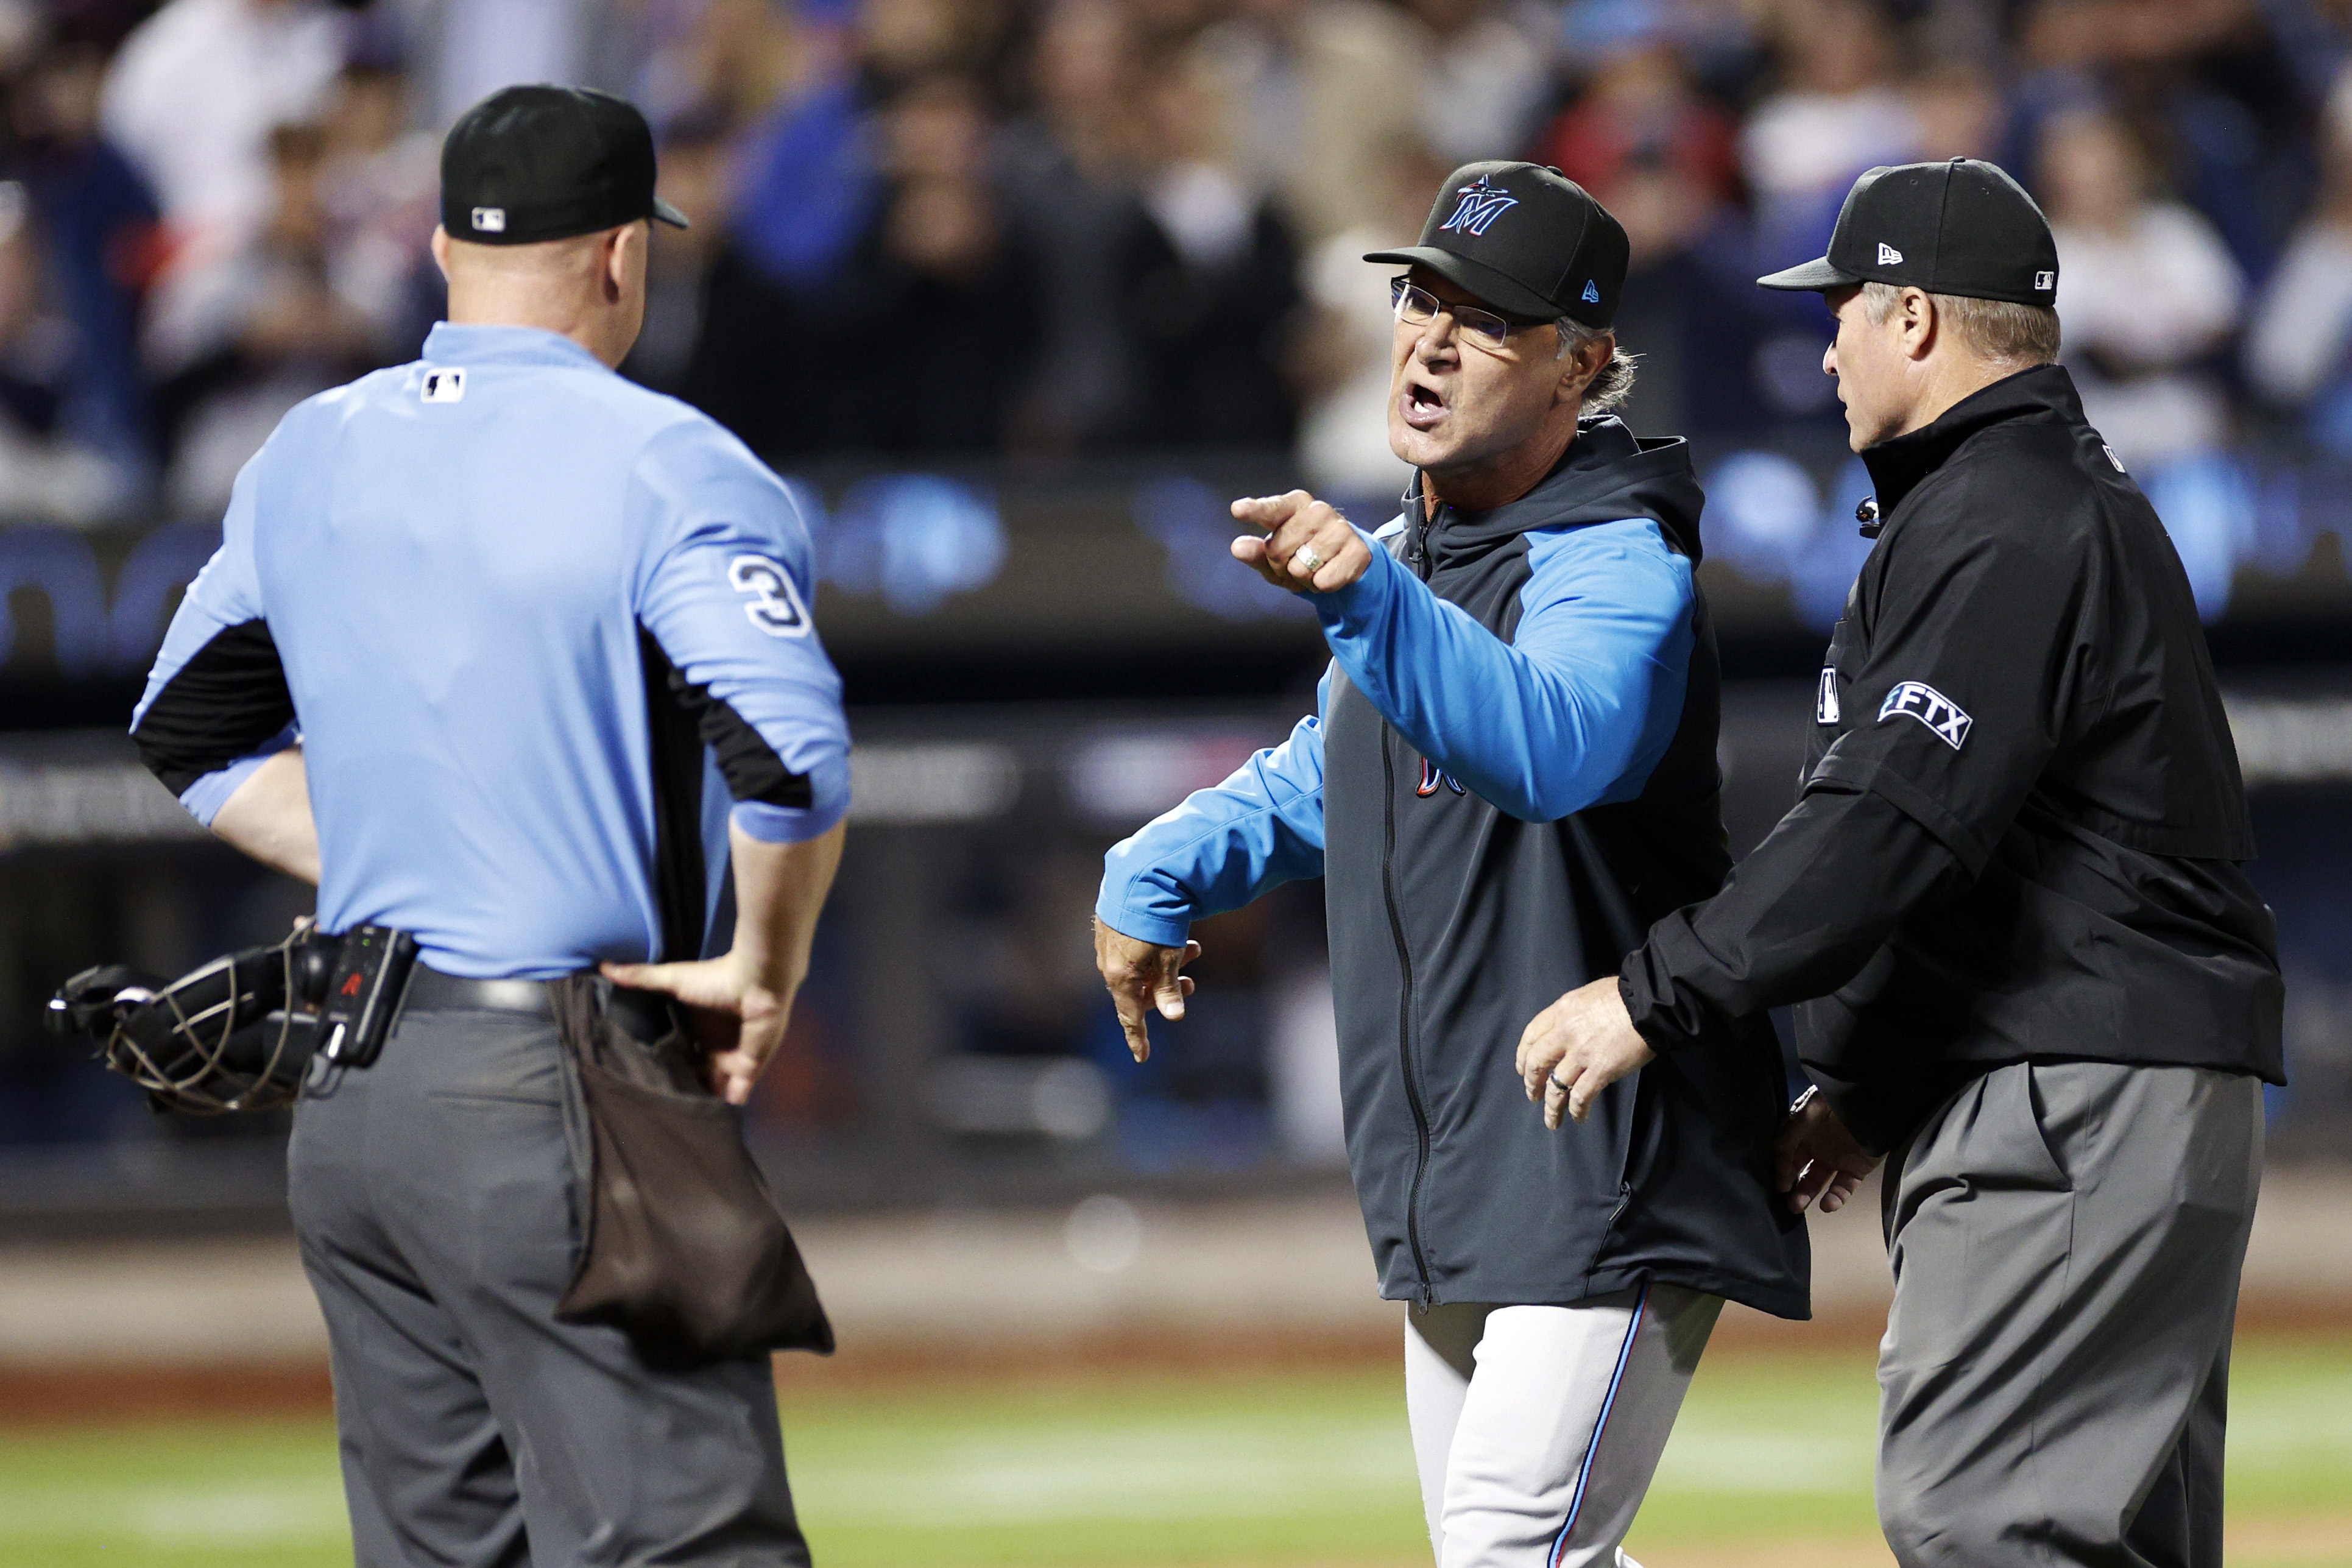 Manager Don Mattingly #8 of the Miami Marlins reacts toward umpire Marvin Hudson #51 (R) and umpire Ryan Blakney #36 (L) after a call during the eighth inning against the New York Mets at Citi Field on September 27, 2022 in the Queens borough of New York City.